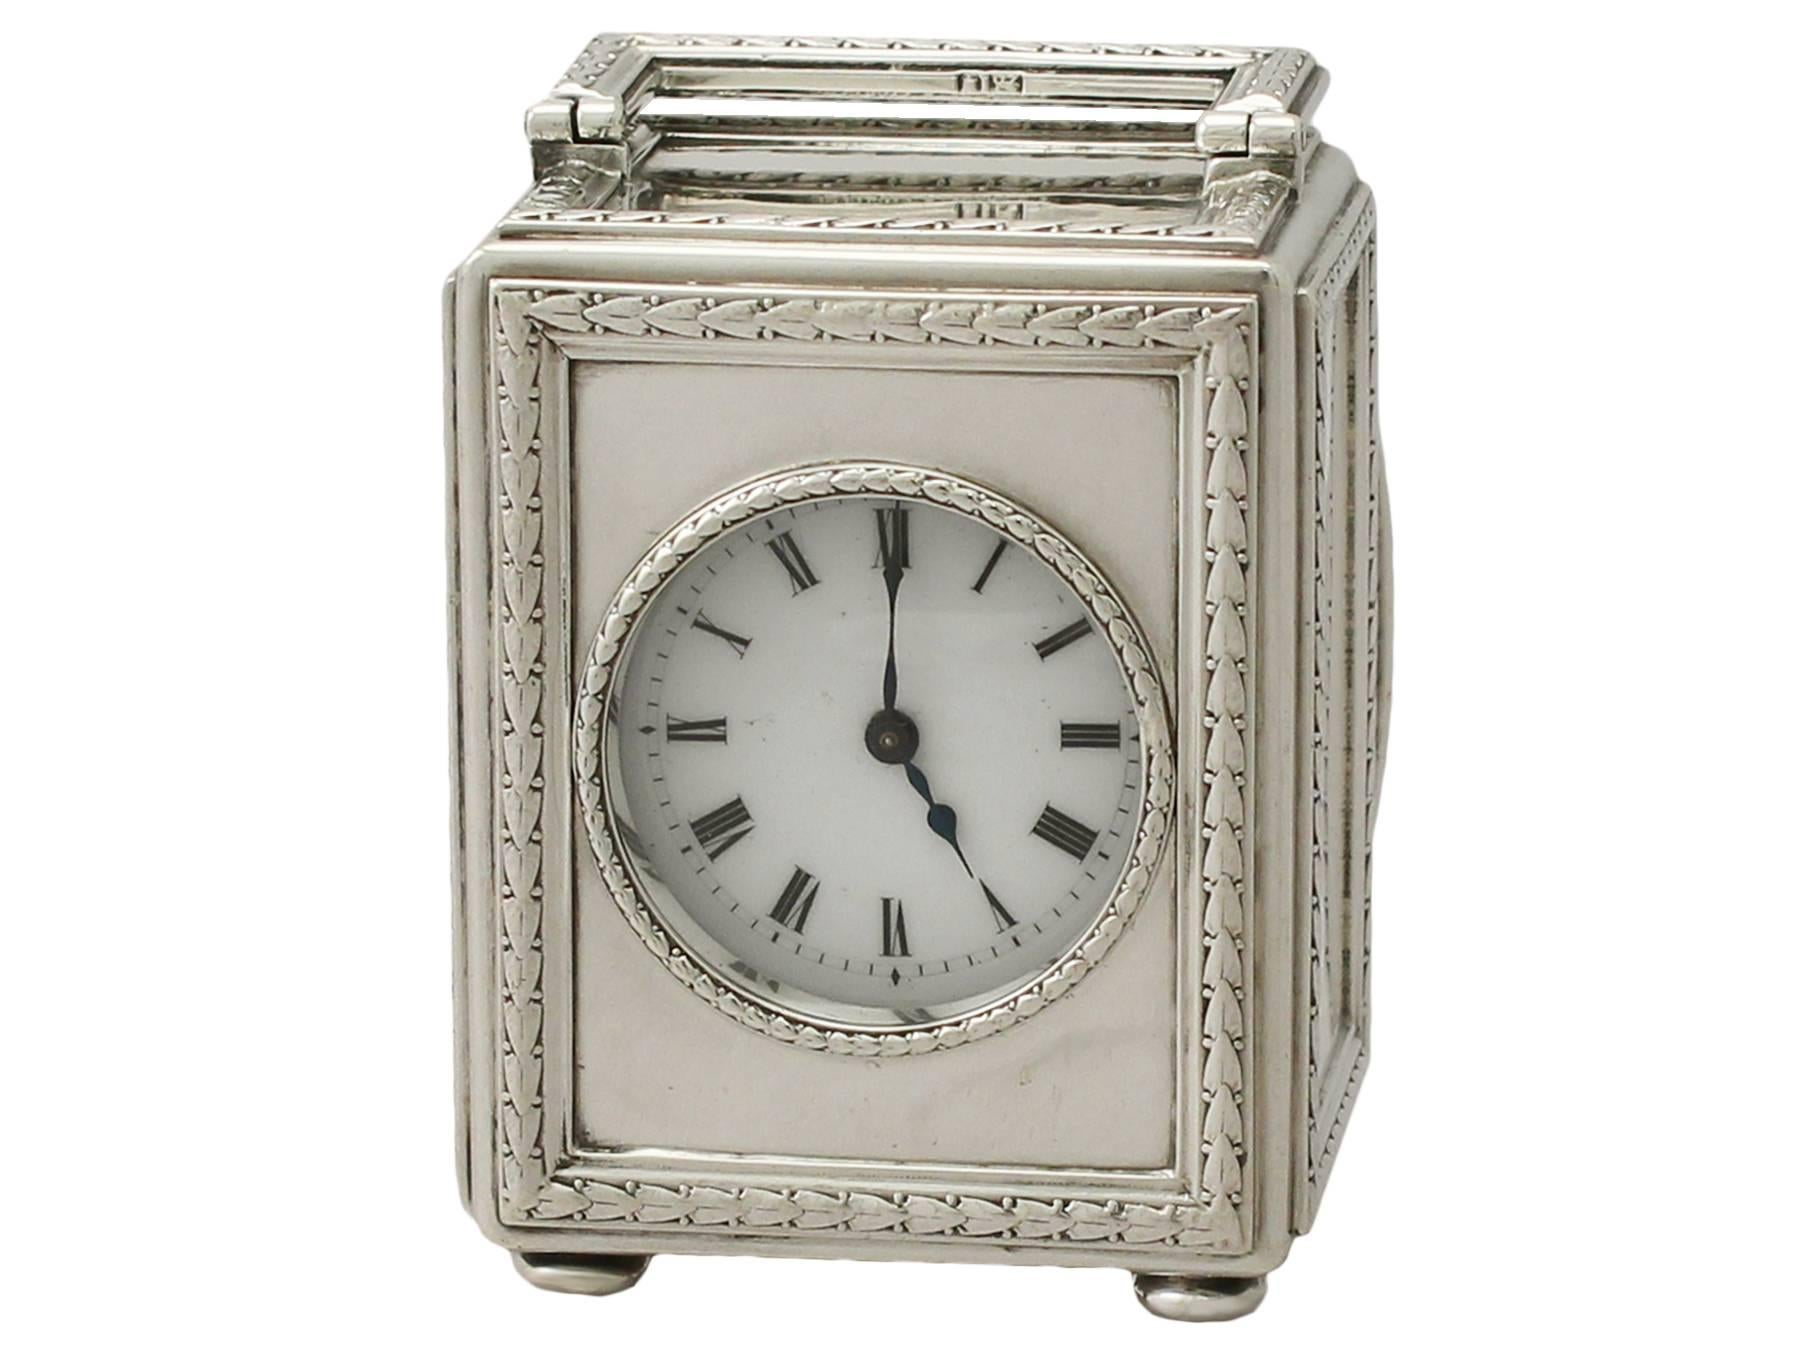 An exceptional, fine and impressive antique Edwardian English sterling silver boudoir clock; part of our antique silver timepiece collection

This exceptional antique Edwardian sterling silver boudoir clock has a rectangular form onto four bun